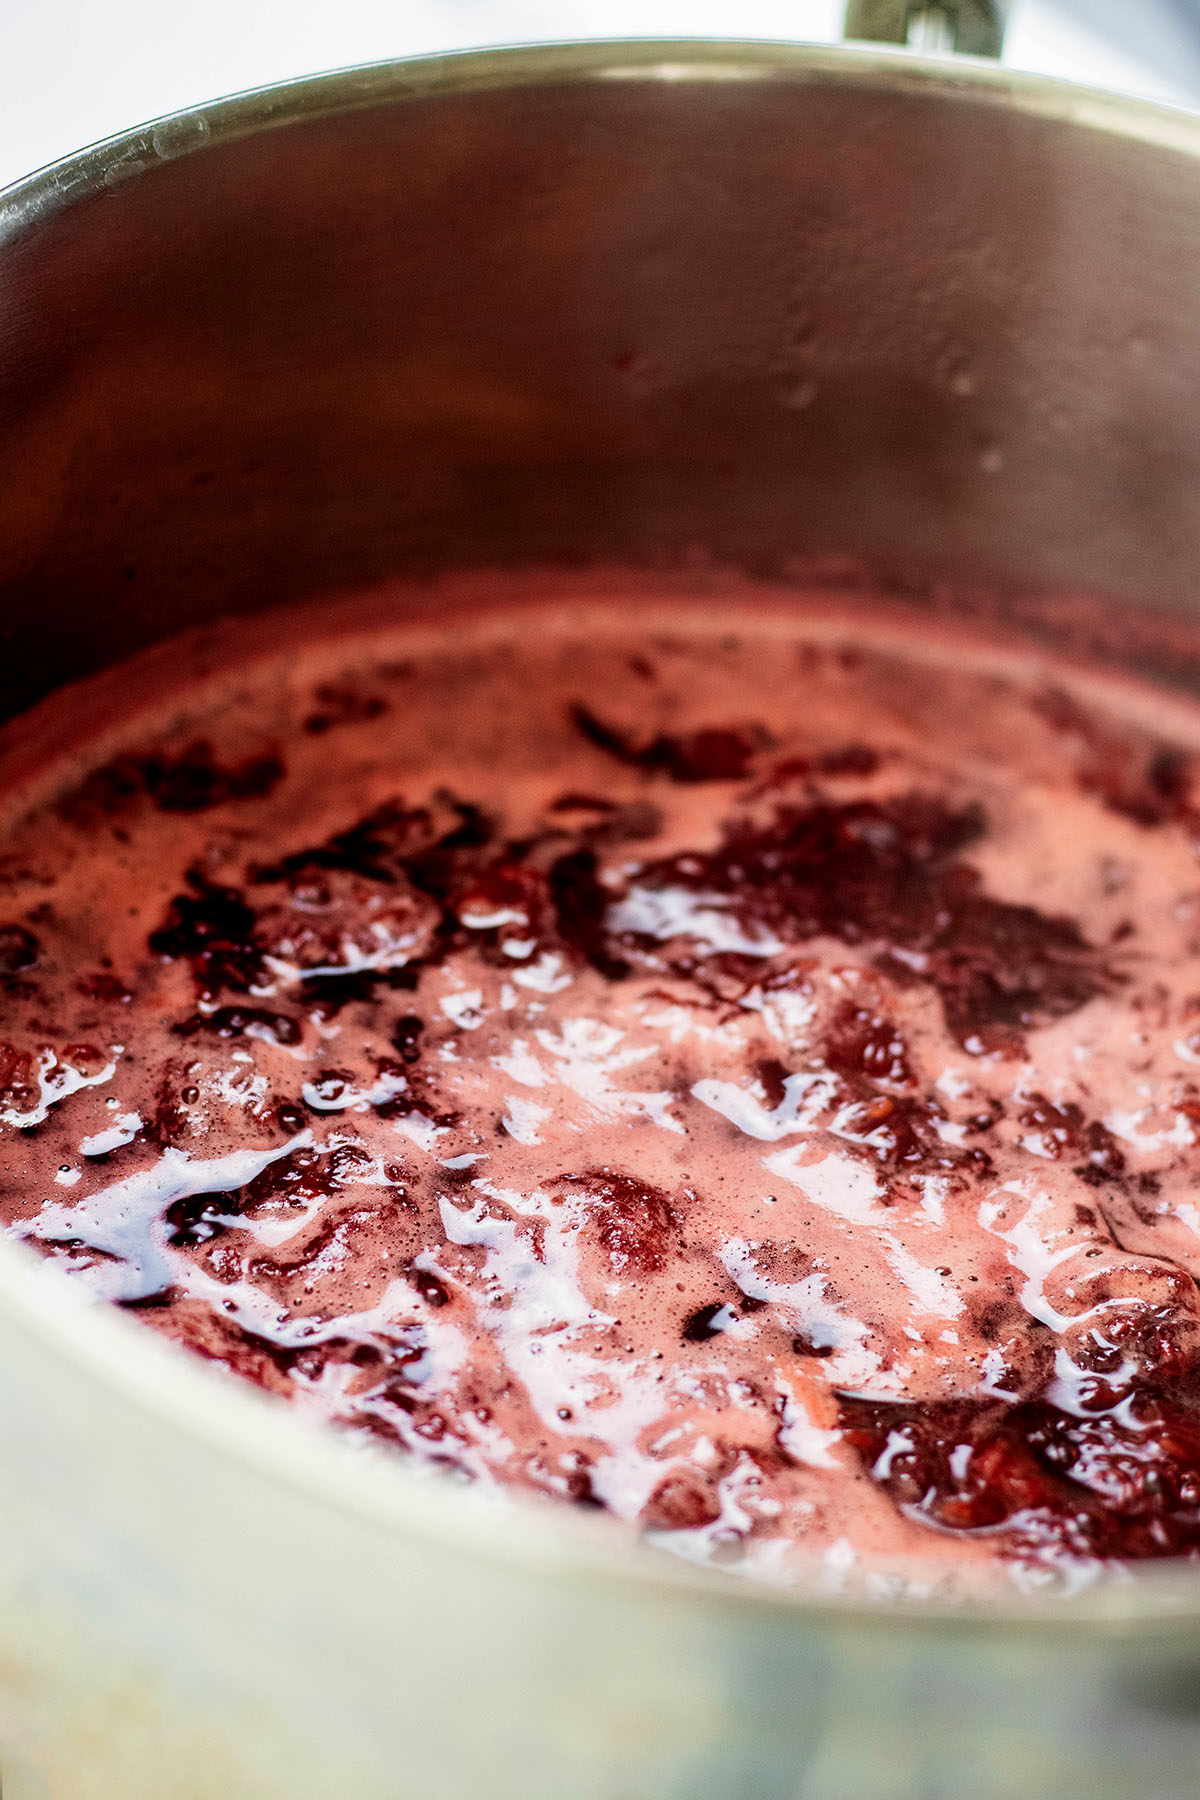 Raspberry syrup cooking in a pan